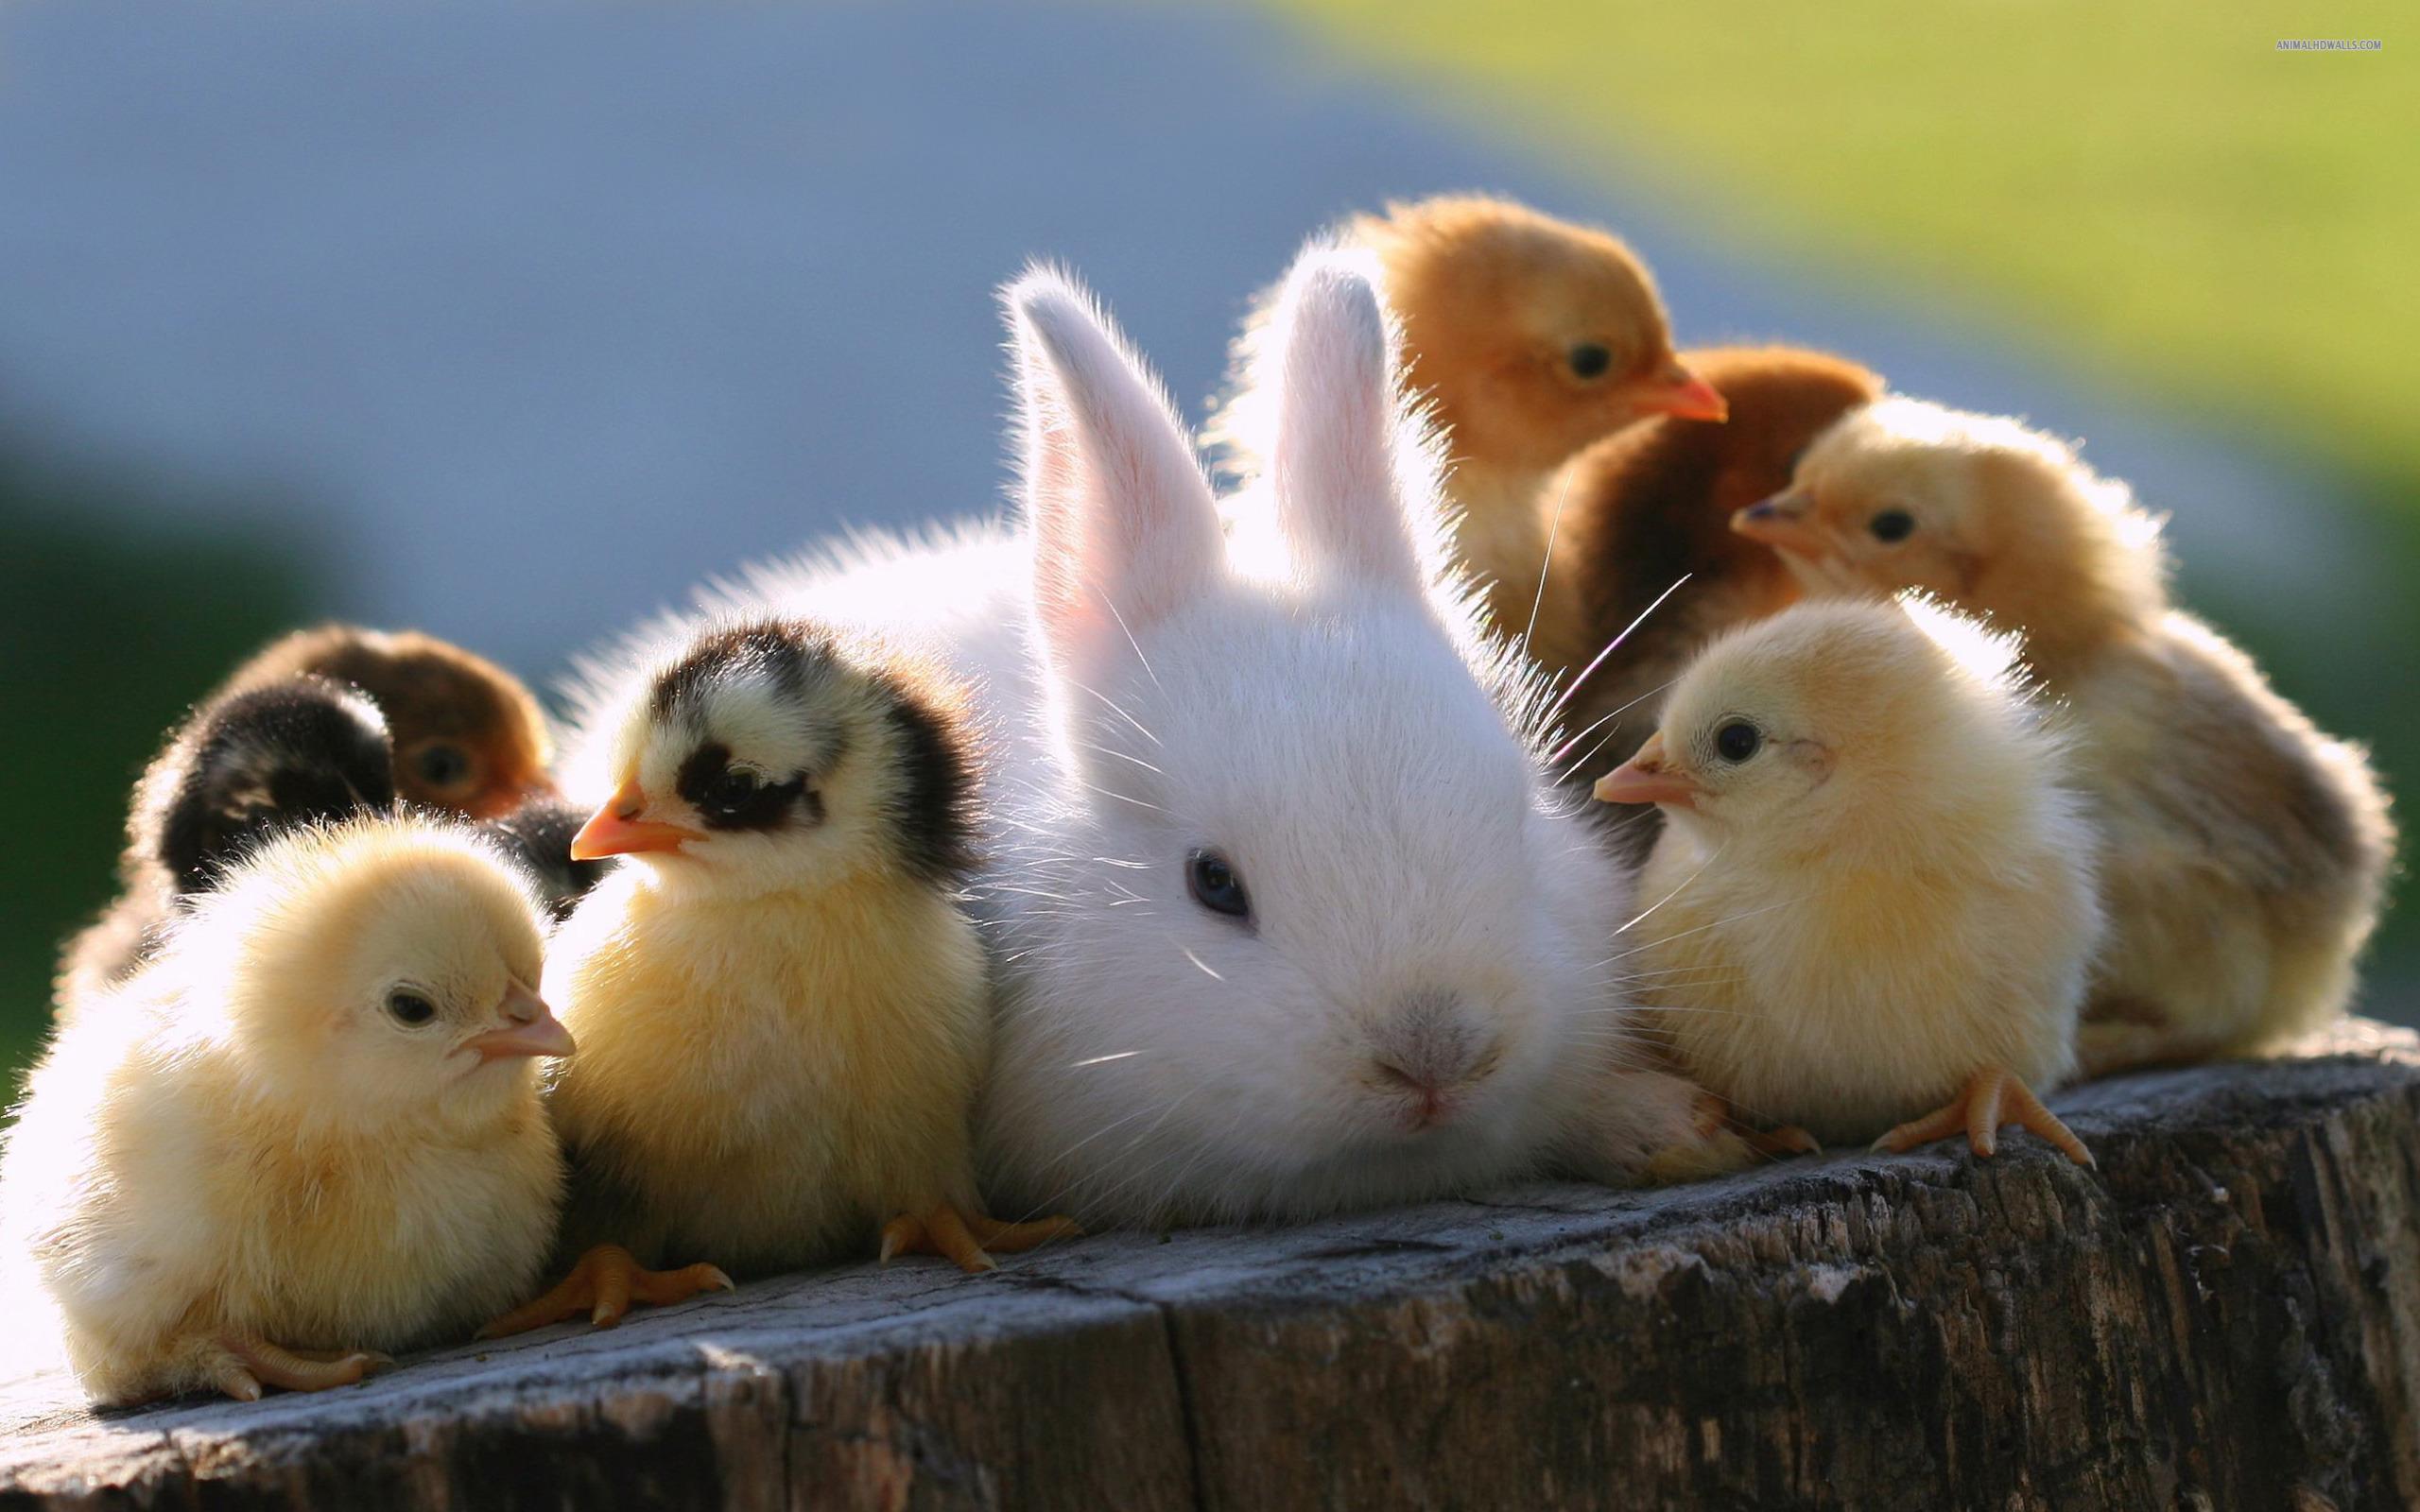 Baby chicks And Rabbit Are So Cute Animals